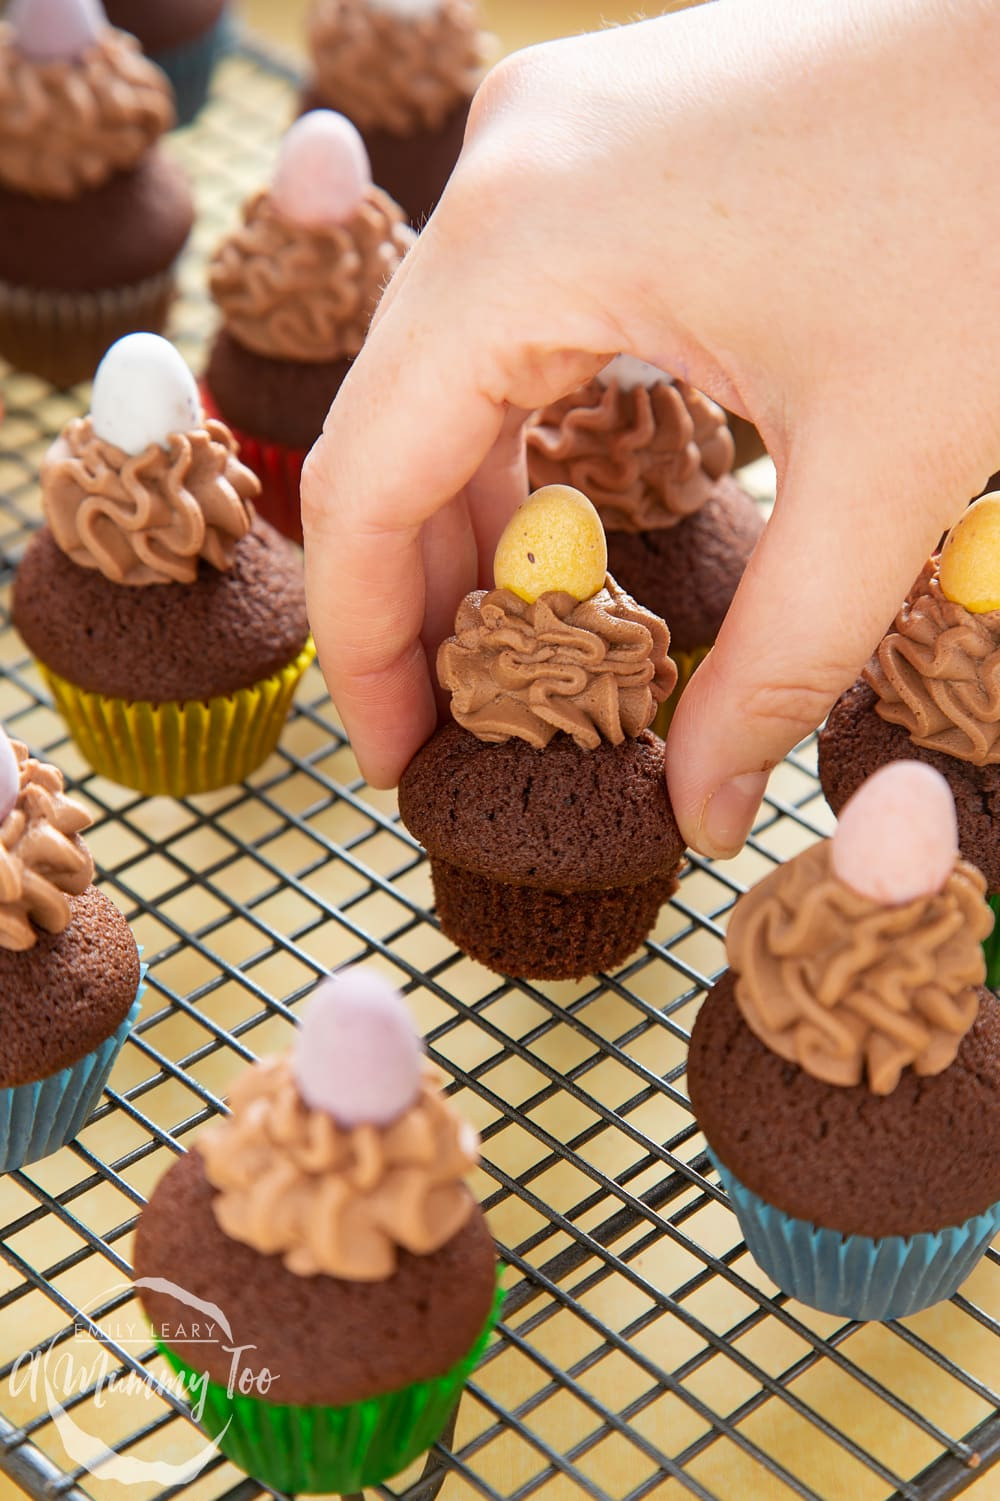 Cupcakes For Easter
 Mini chocolate cupcakes perfect for Easter A Mummy Too